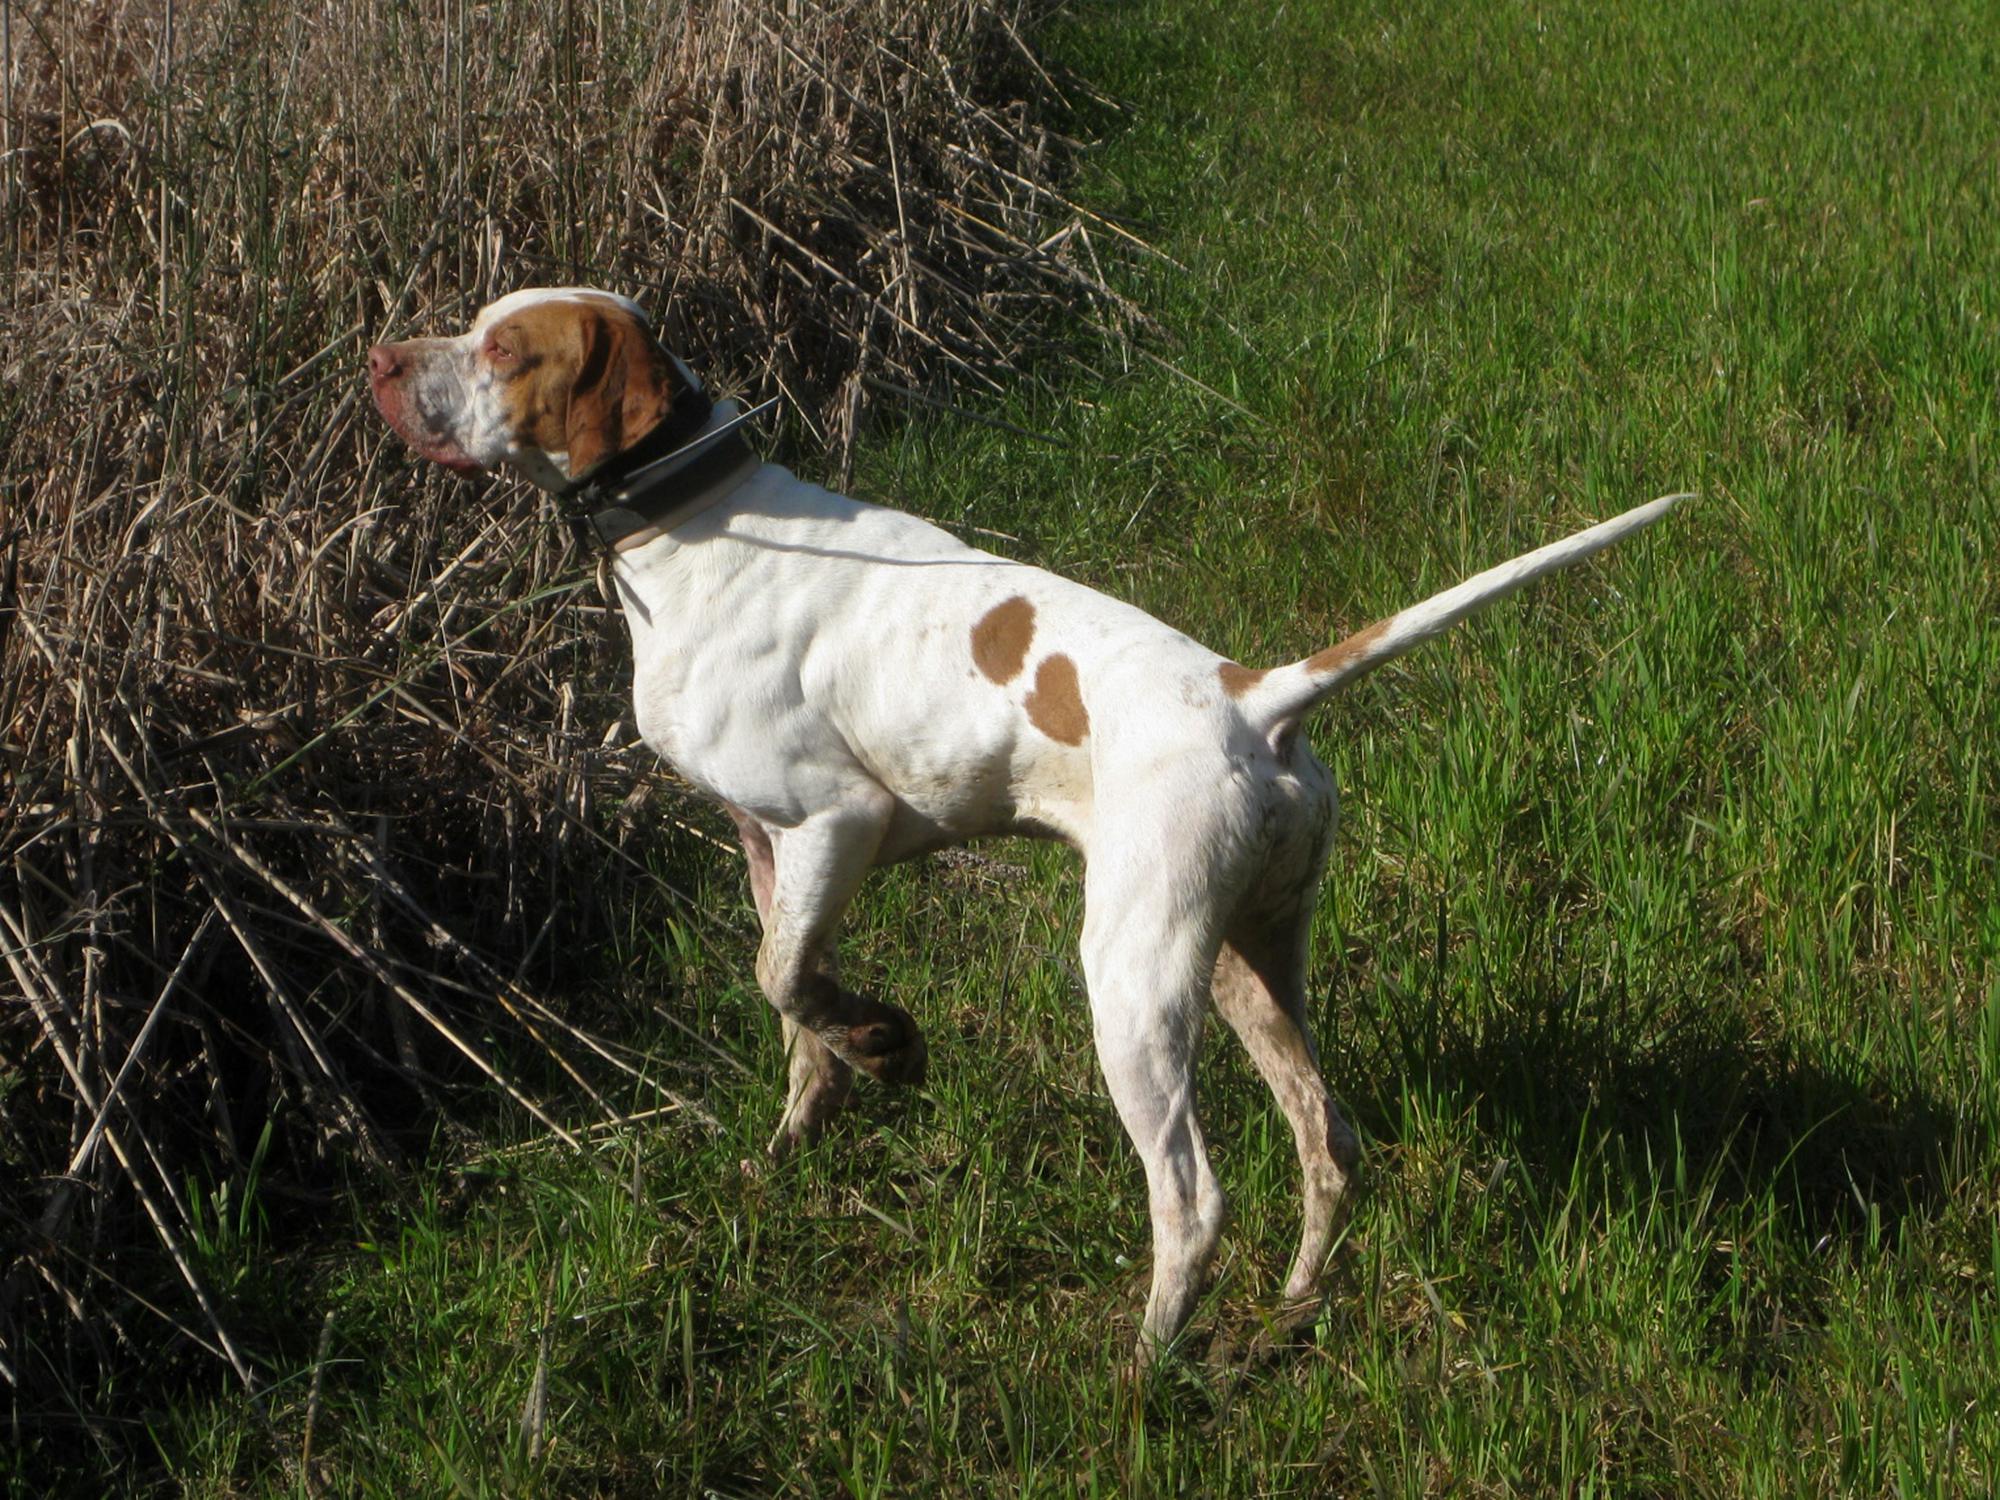 Landowners should consider several factors when preparing hunting leases for their land, including what wildlife species individuals may hunt on the land -- from bobwhite quail to white-tailed deer. (Photo by MSU Extension Service/Daryl Jones)